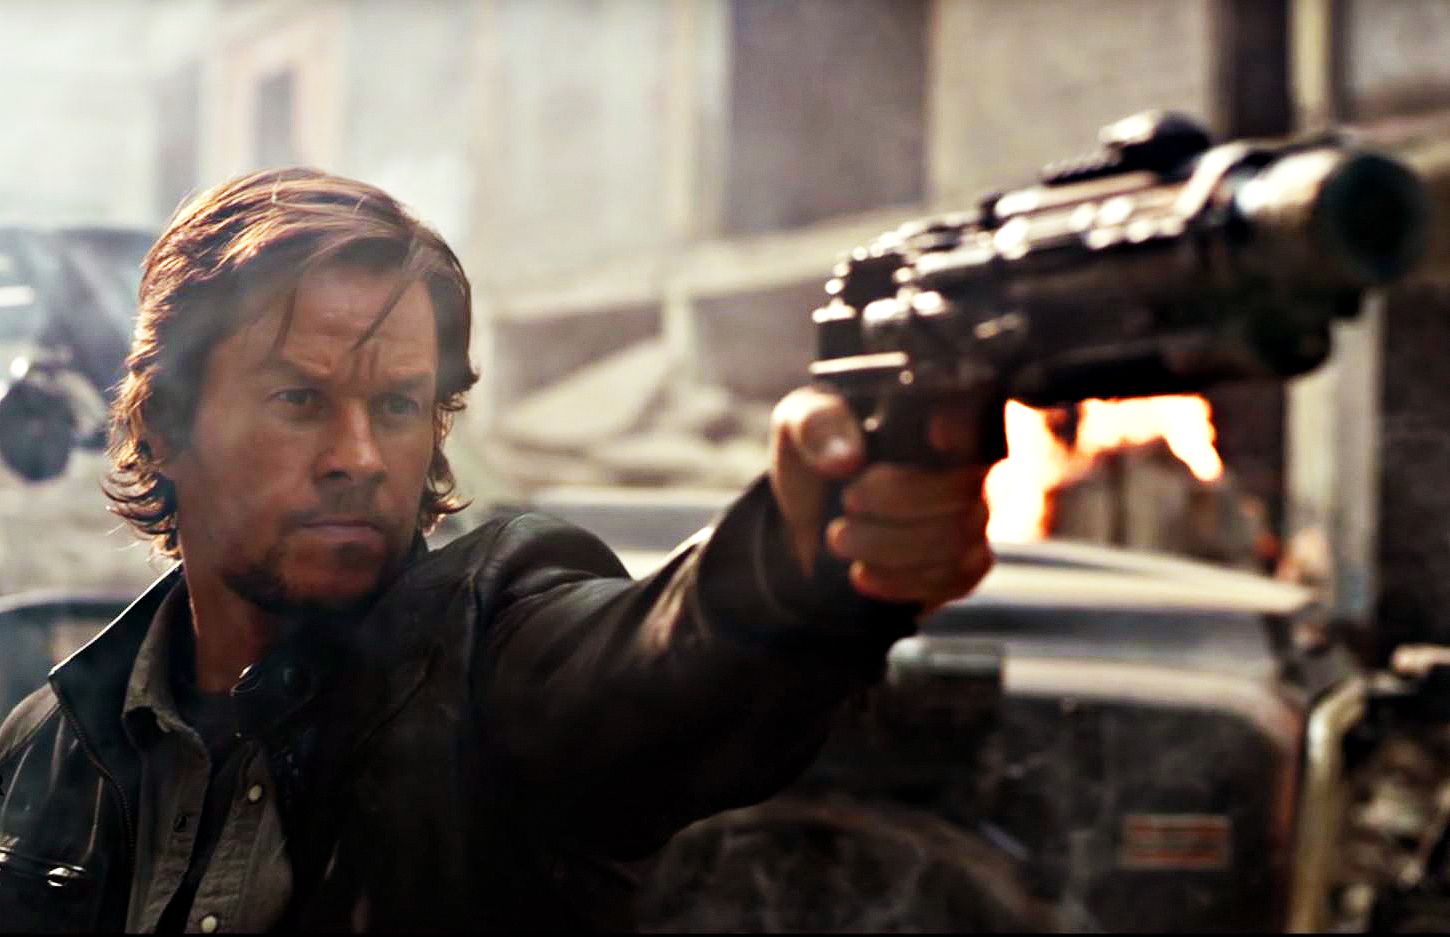 PHOTO: Mark Wahlberg in a scene from the movie, "Transformers: The Last Knight," 2017.